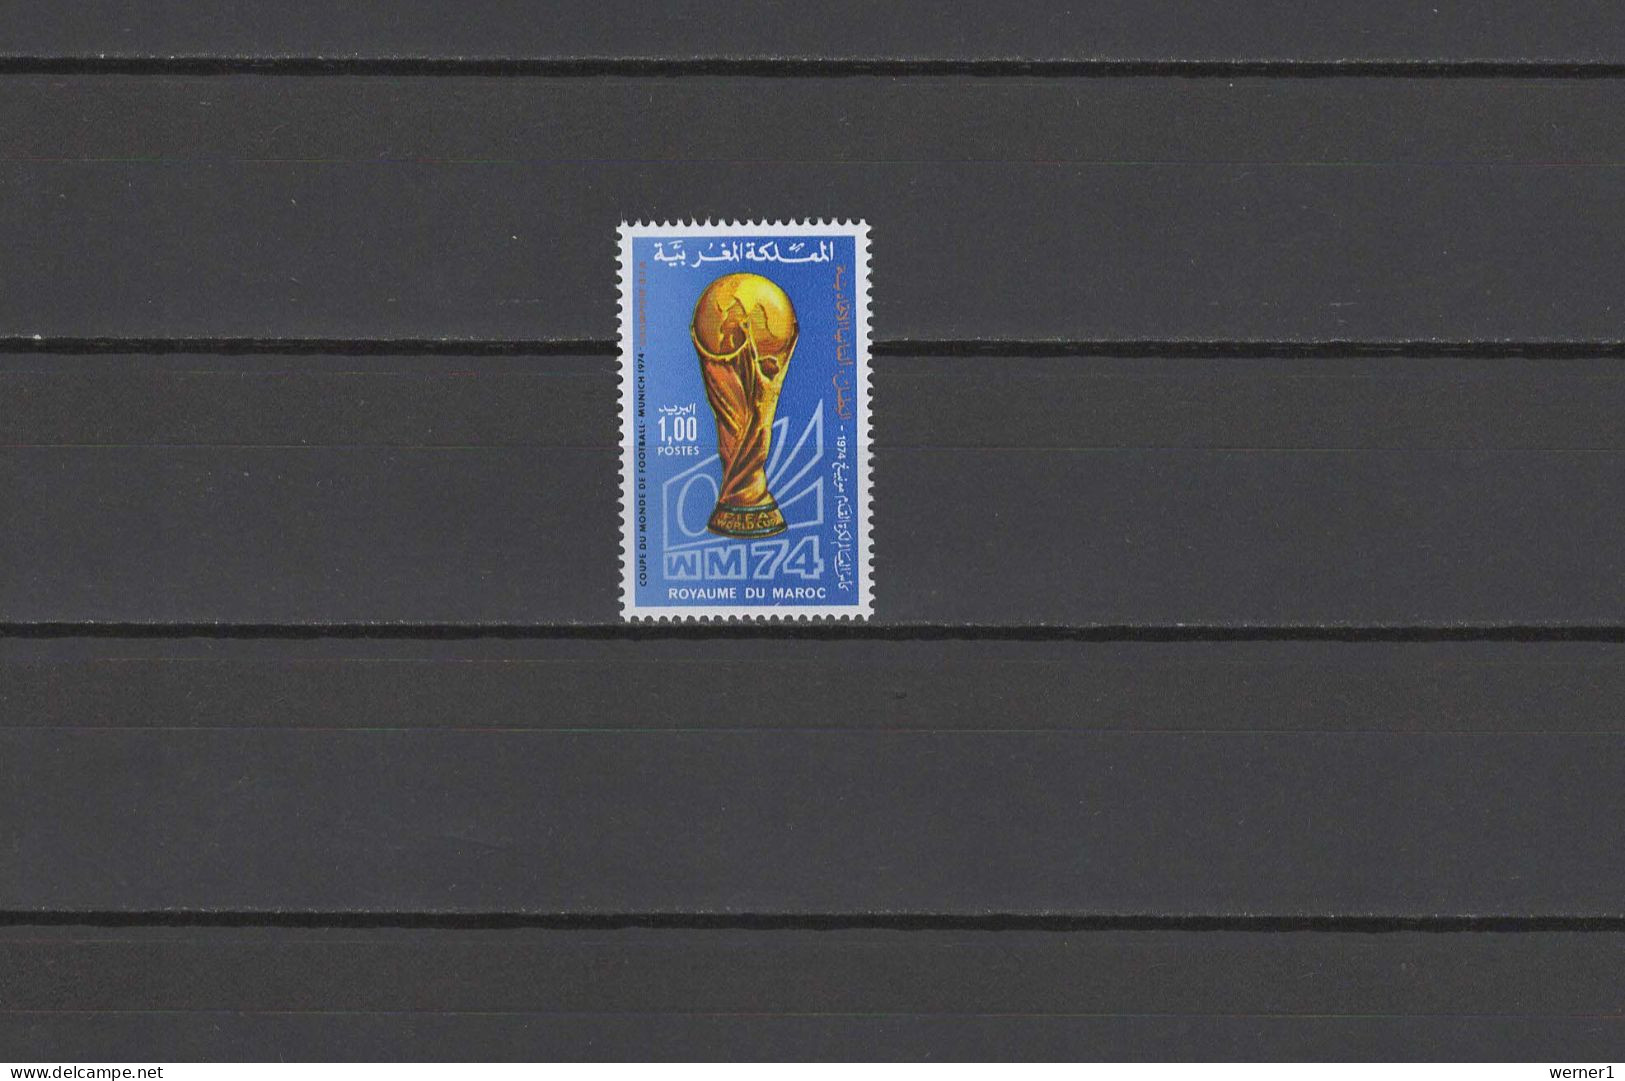 Morocco 1974 Football Soccer World Cup Stamp With Golden Winners Overprint MNH -scarce- - 1974 – Allemagne Fédérale